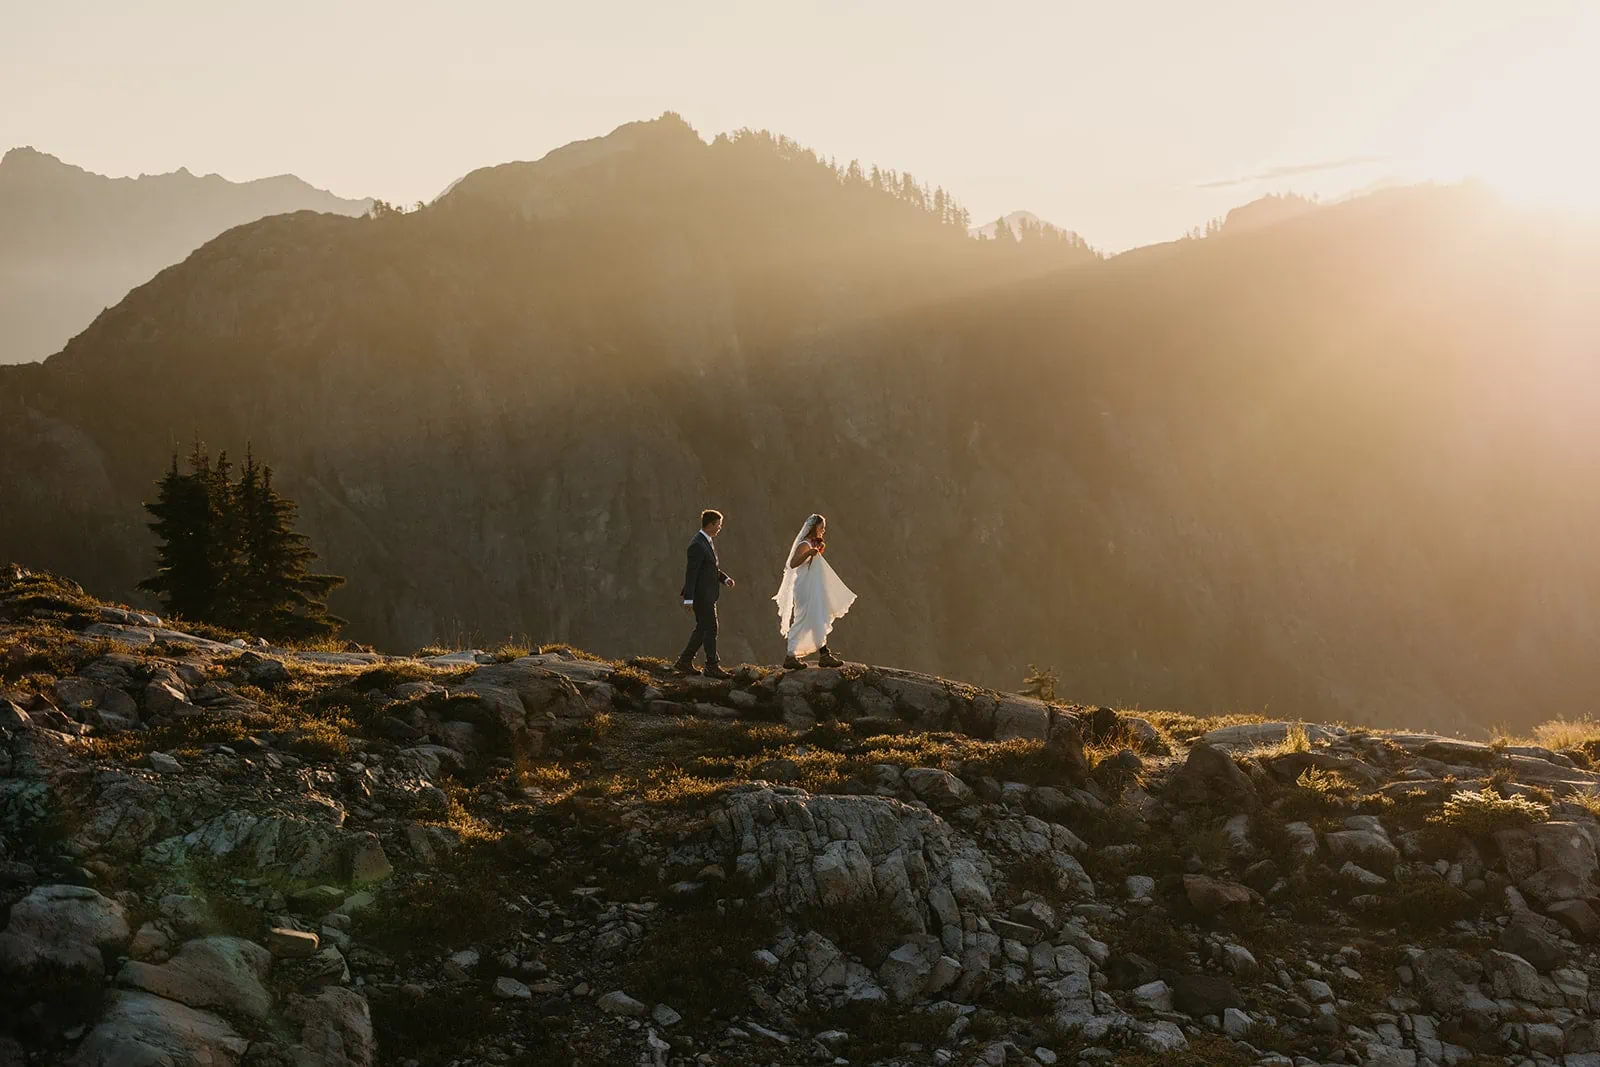 A couple hikes in the mountains during private vows.